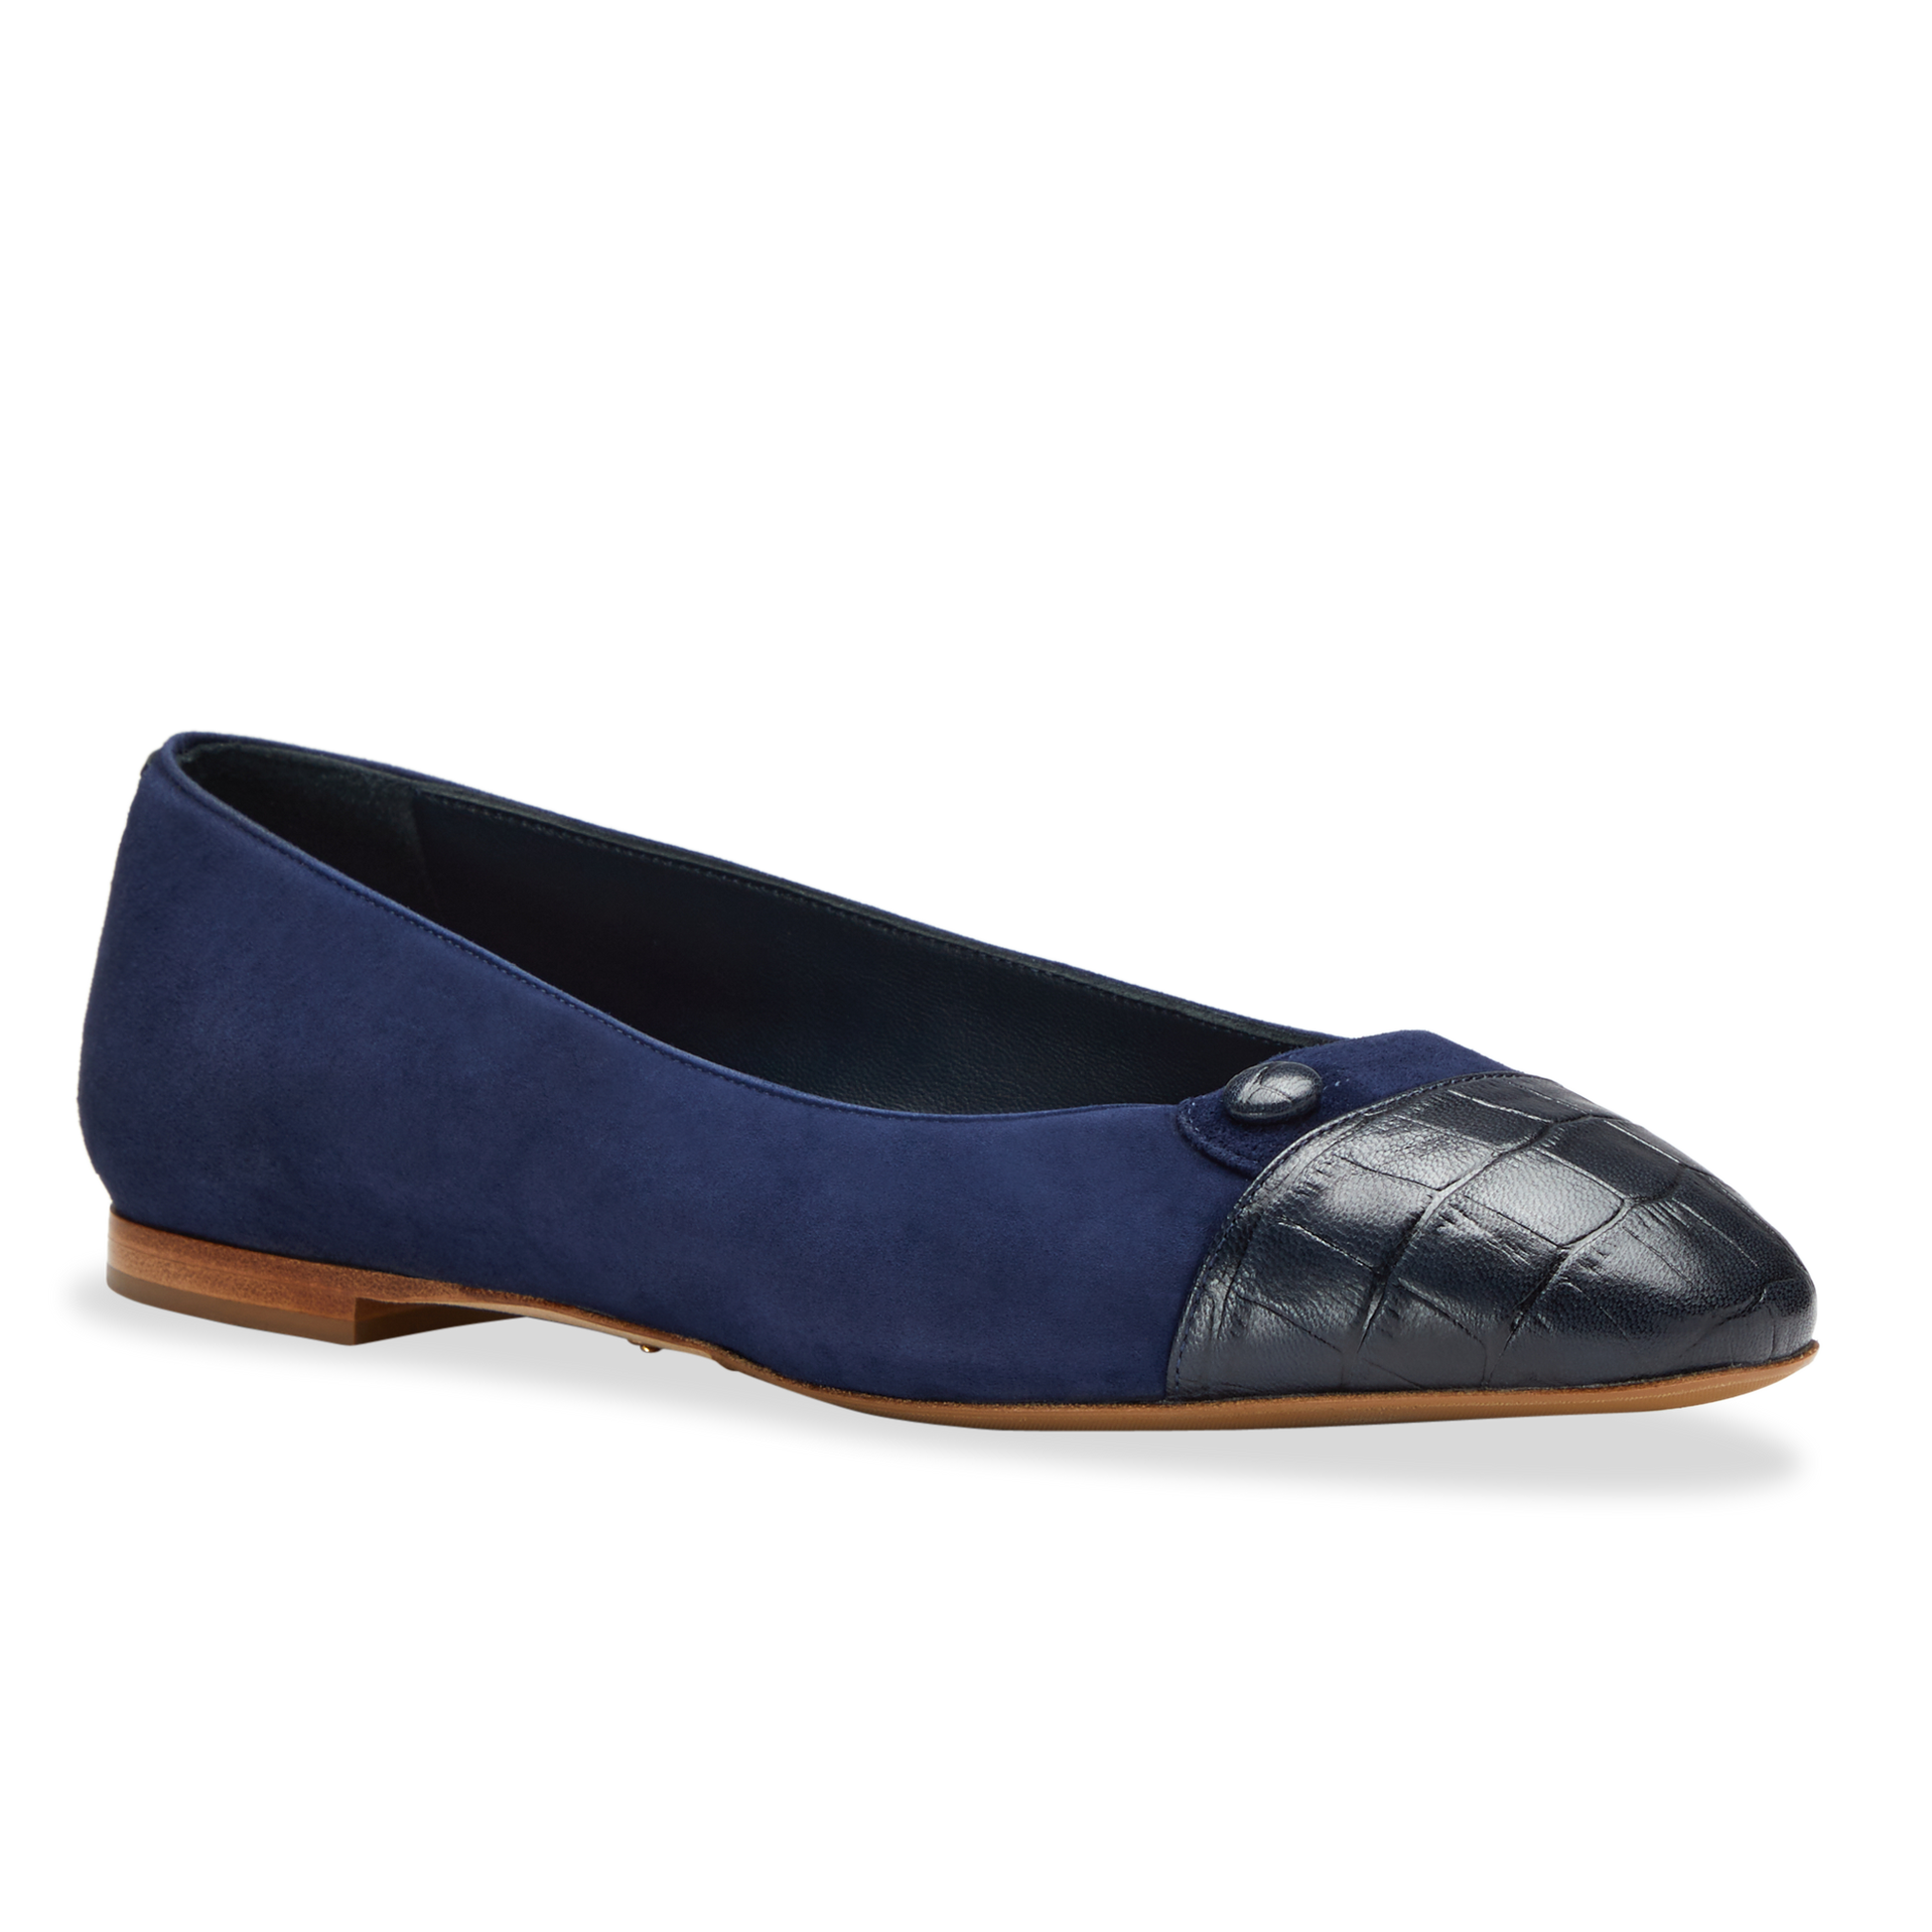 Sarah Flint Sacchetto Ballet Flat | Blue Flats for Women | Navy Suede | Luxurious Comfortable Designer Shoes Handcrafted in Italy